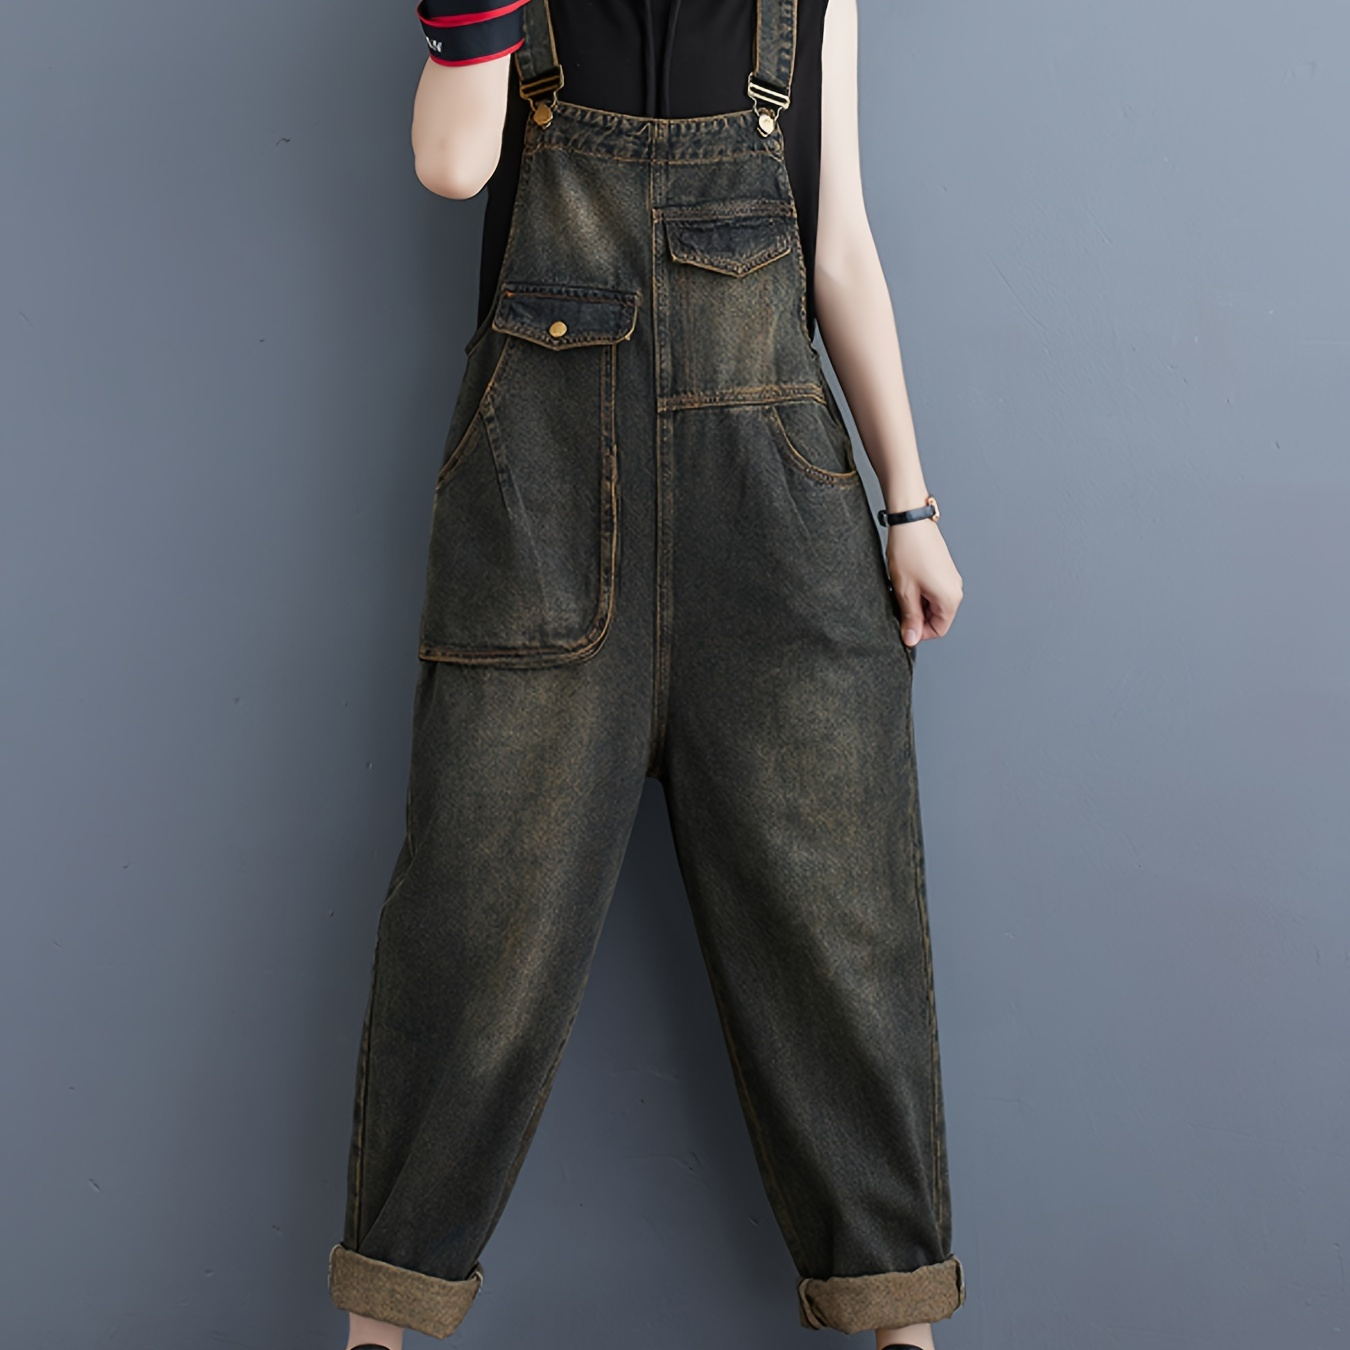 

Women's Casual Denim Overalls, Spring Loose Fit, Vintage Washed Plain Jeans Dungarees With Pockets, Adjustable Straps